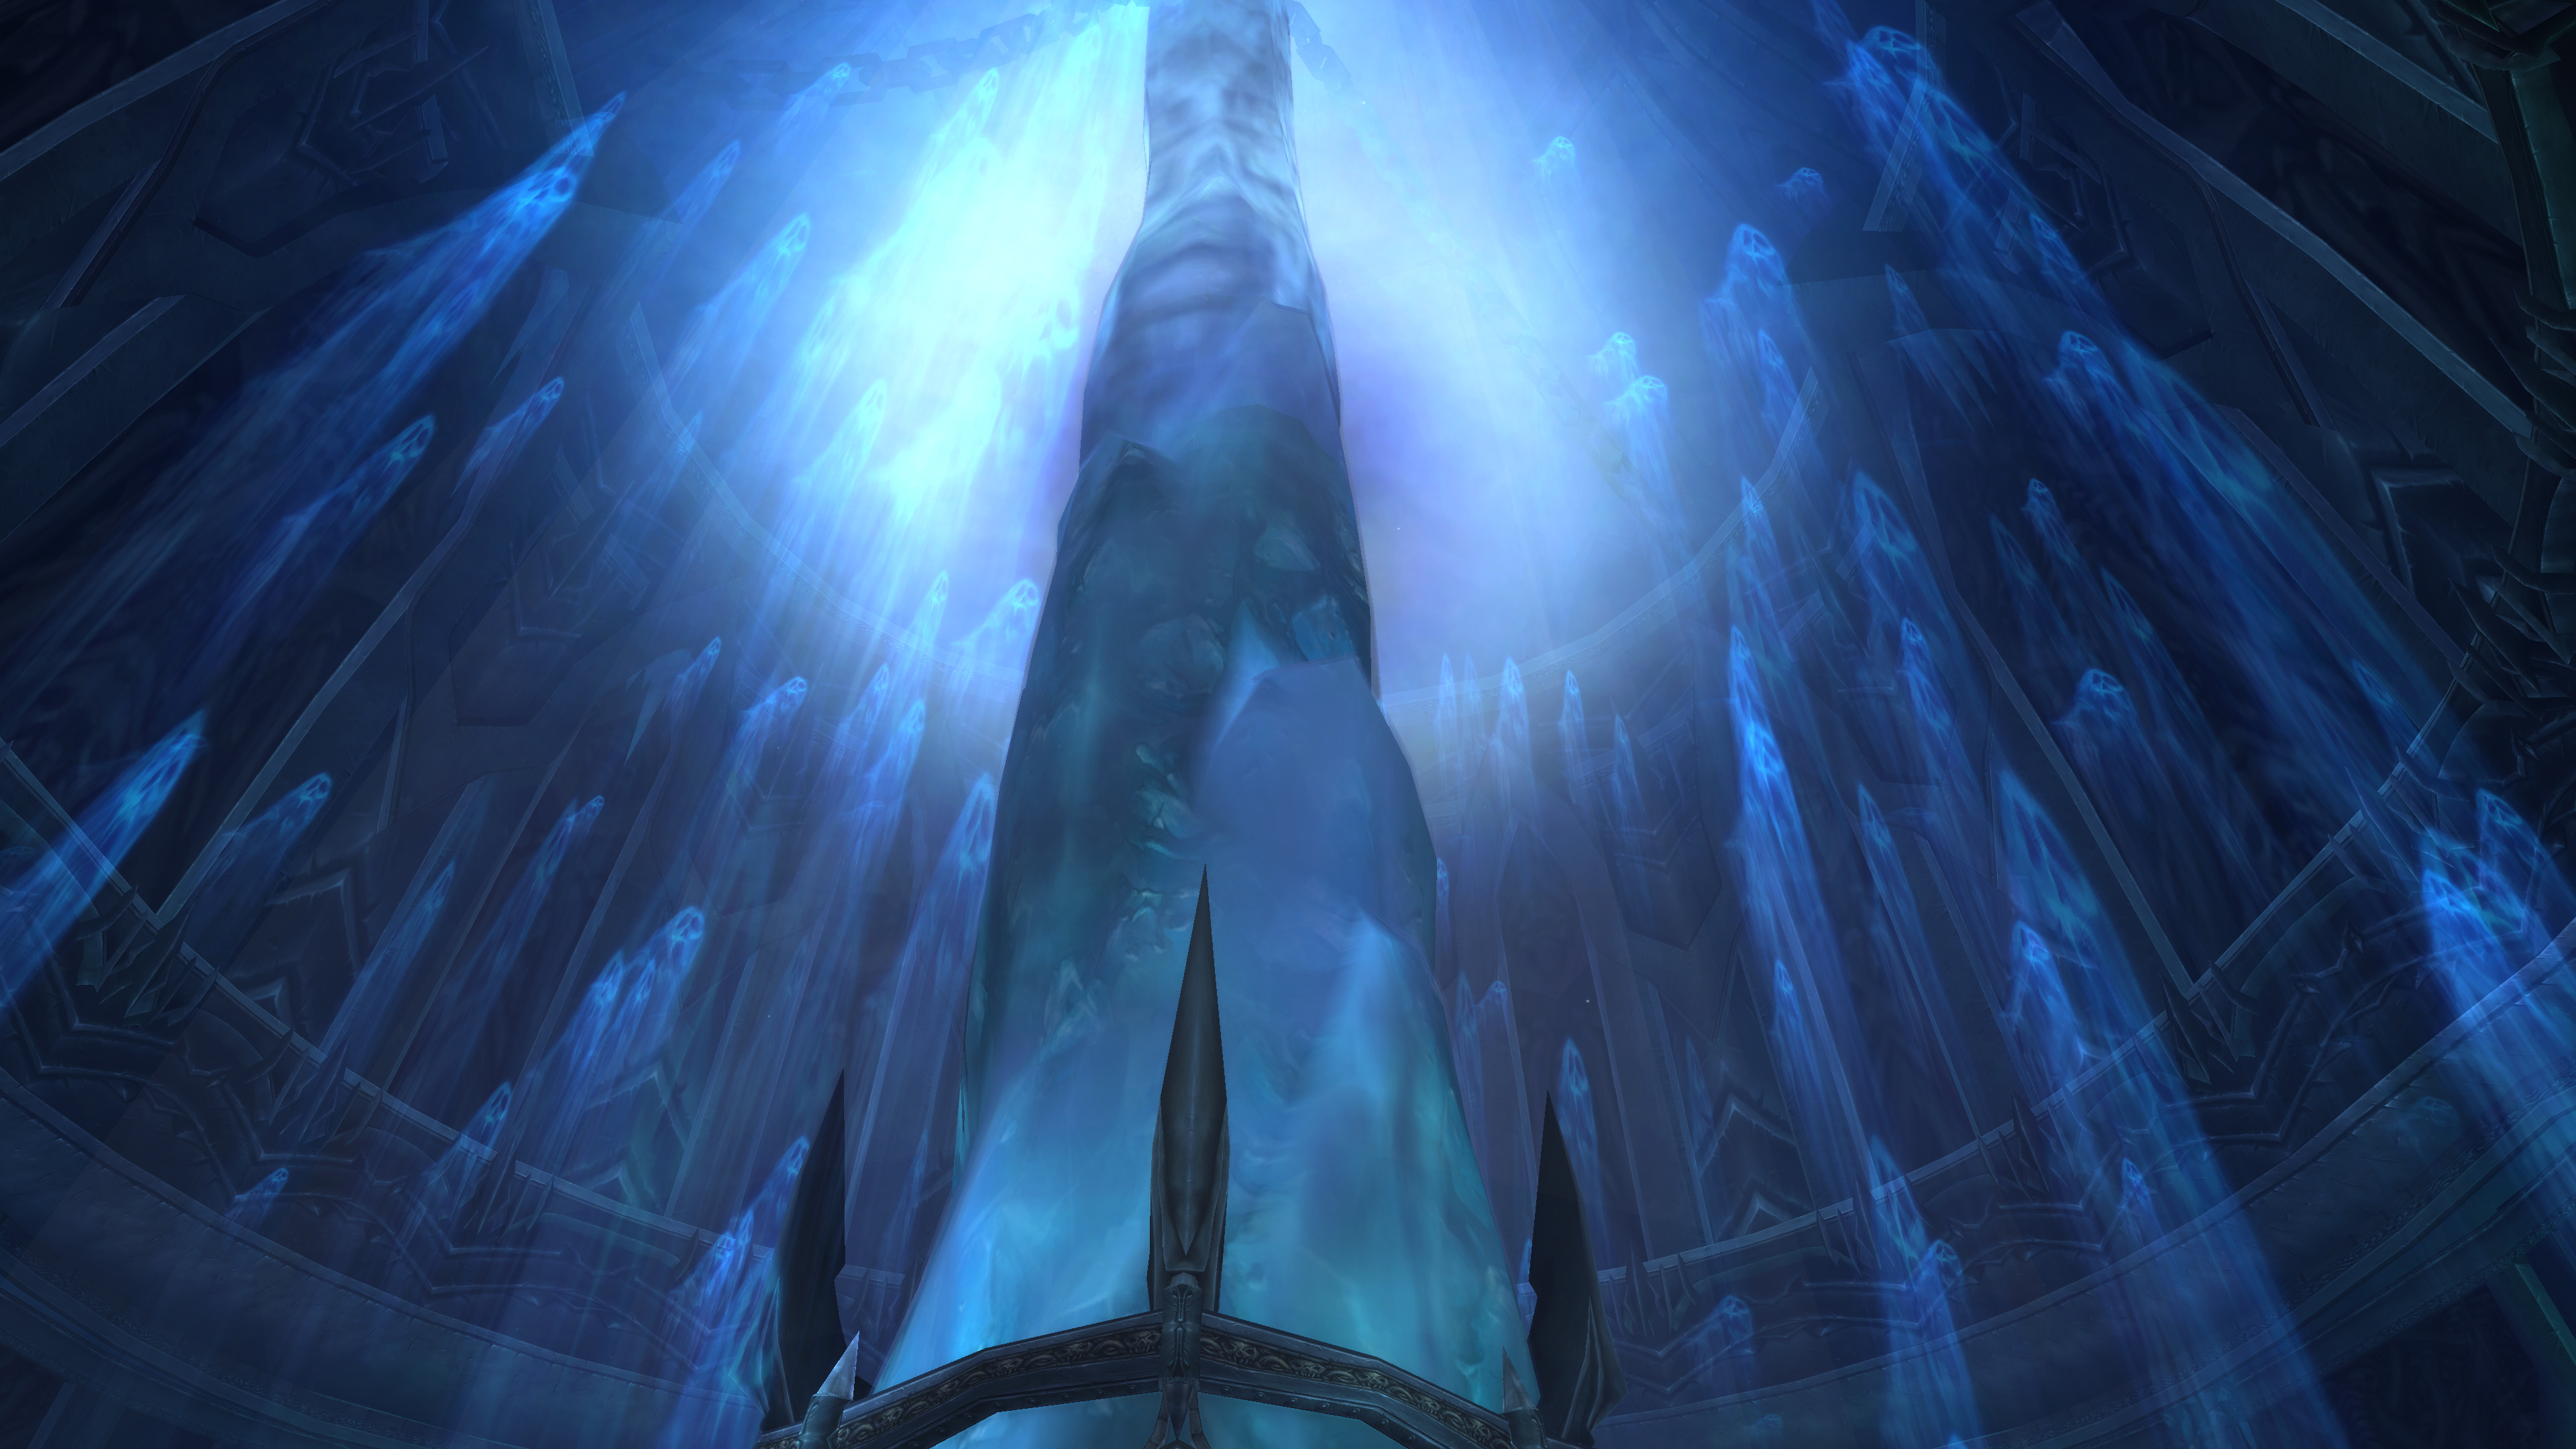 World Of Warcraft, Video Games, World Of Warcraft: Wrath Of The Lich King Wallpaper